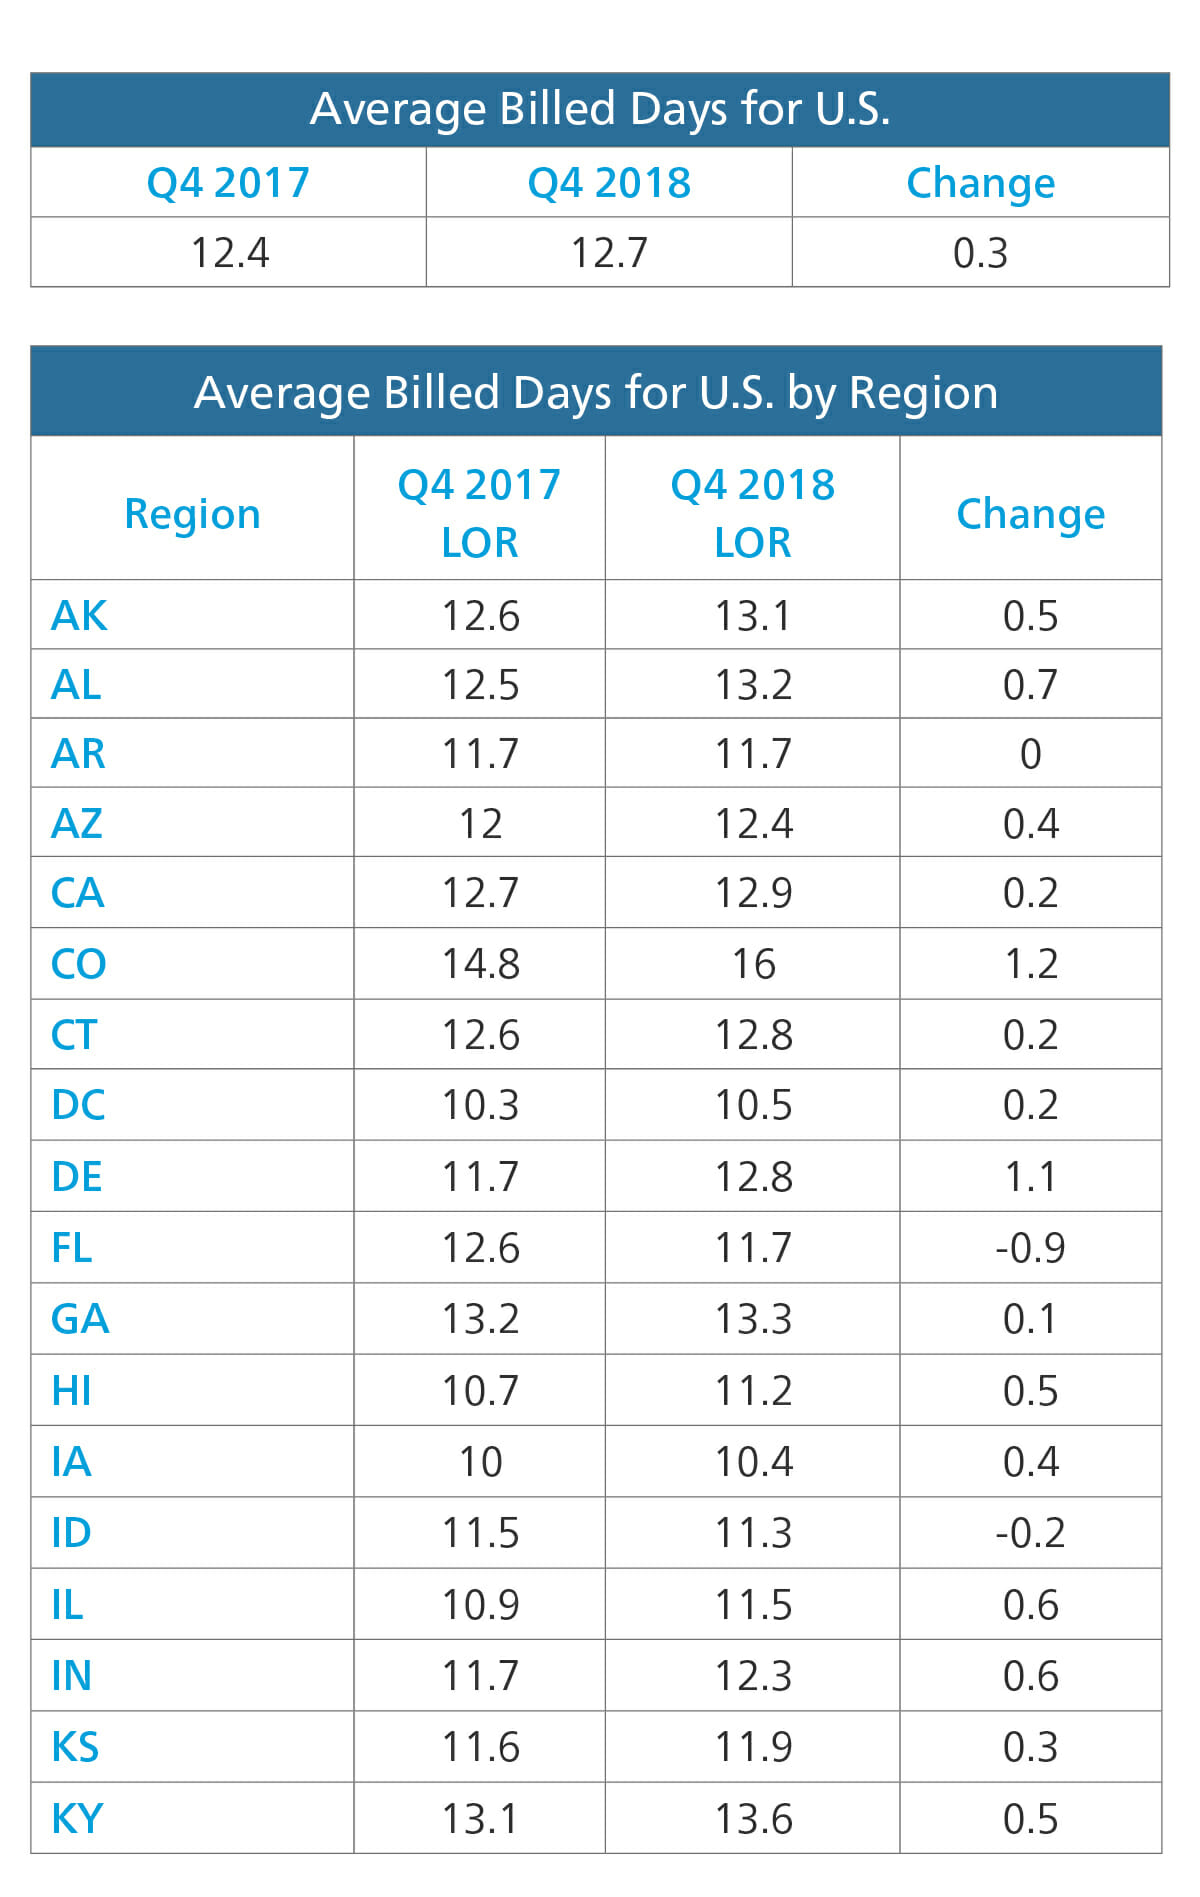 Average Billed Days for US by Region A